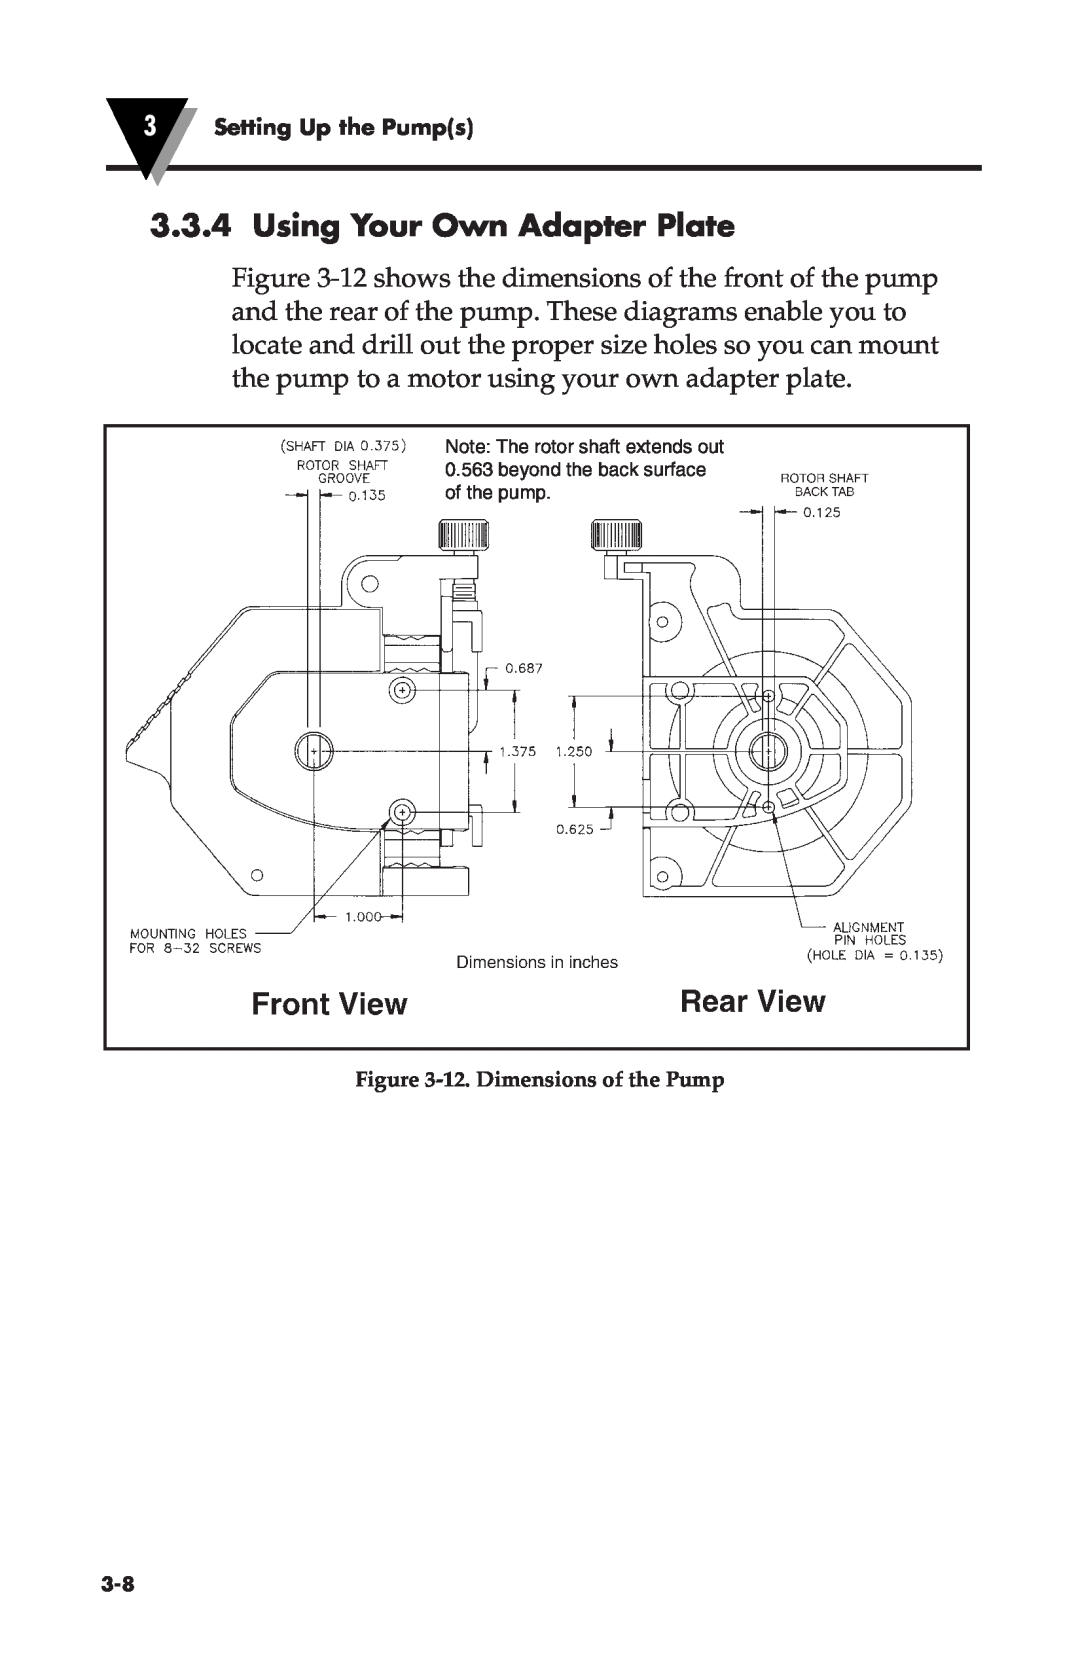 Omega Vehicle Security FPU500 manual 3.3.4Using Your Own Adapter Plate, 3Setting Up the Pumps, 12.Dimensions of the Pump 